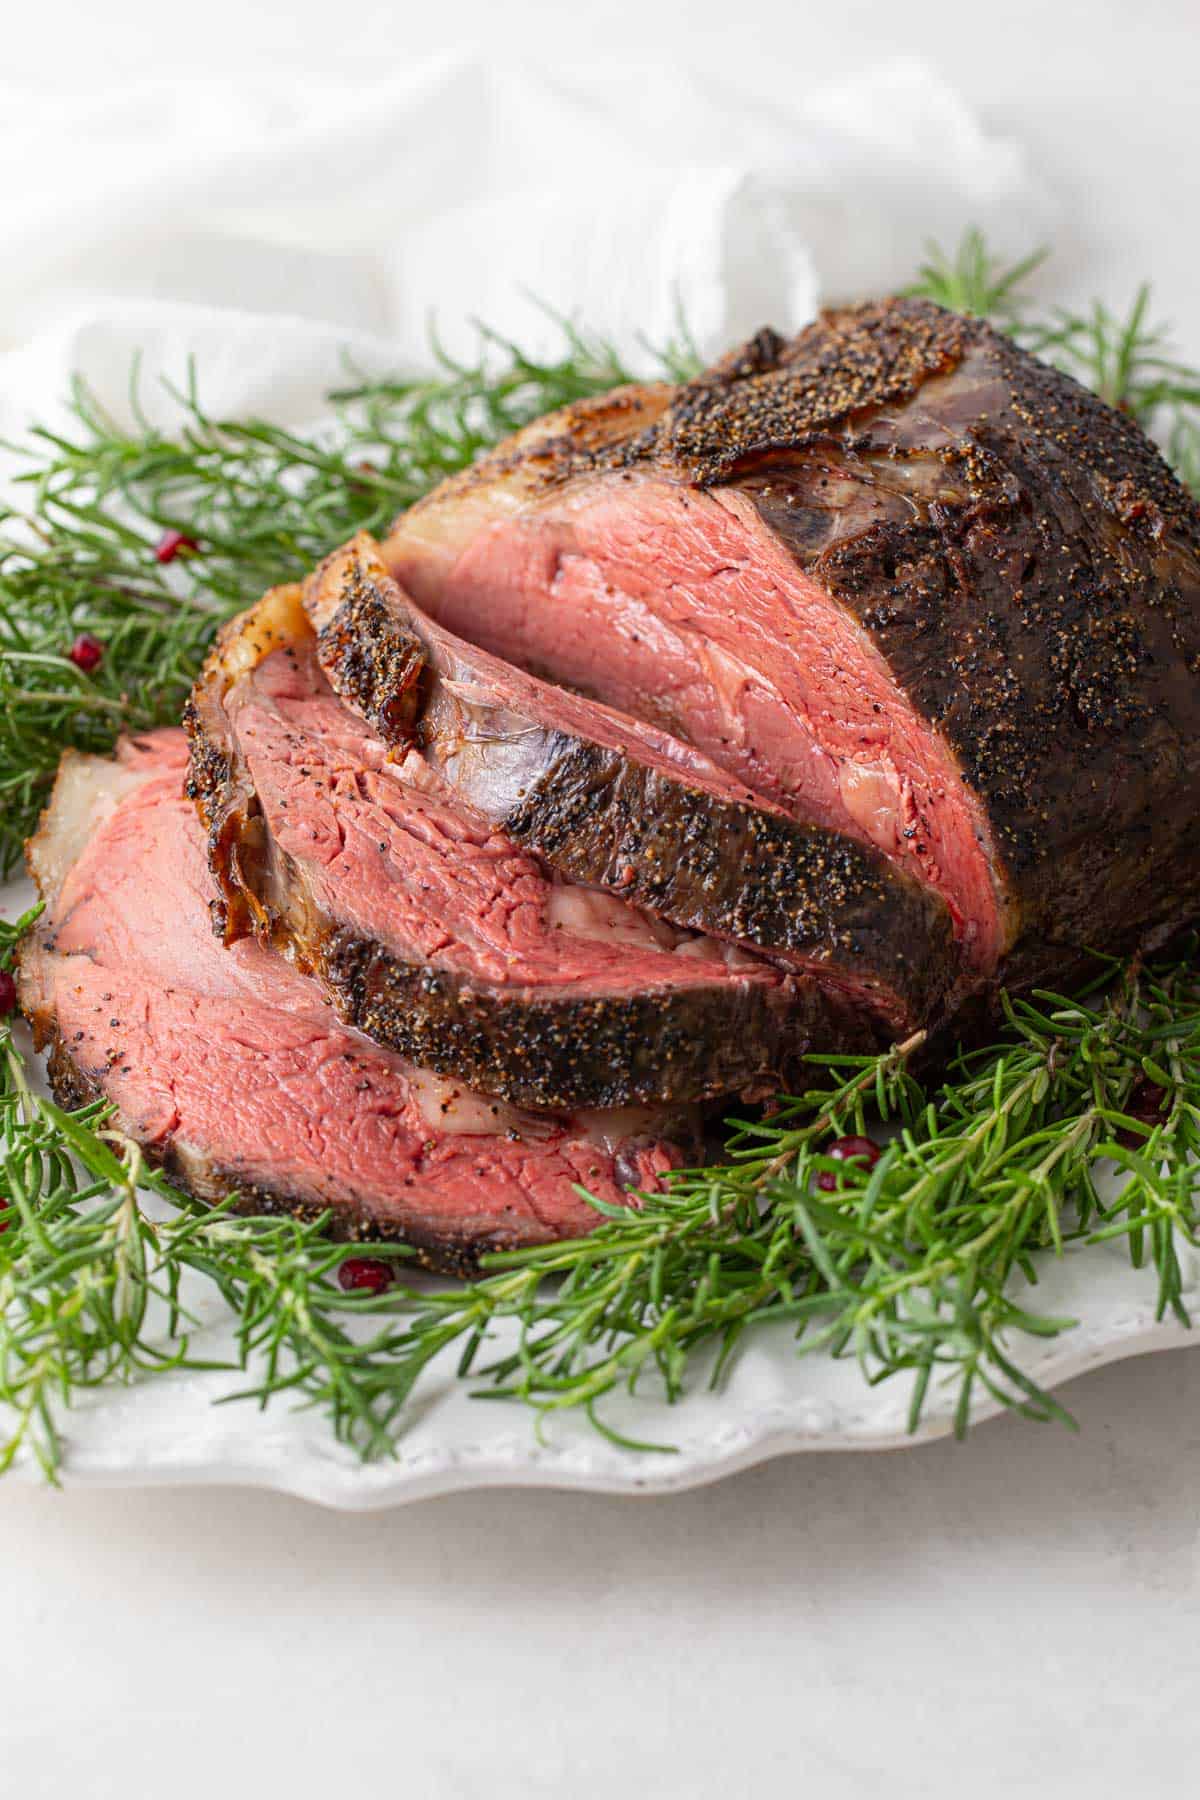 Front view of a roasted and sliced  boneless prime rib on a serving platter.